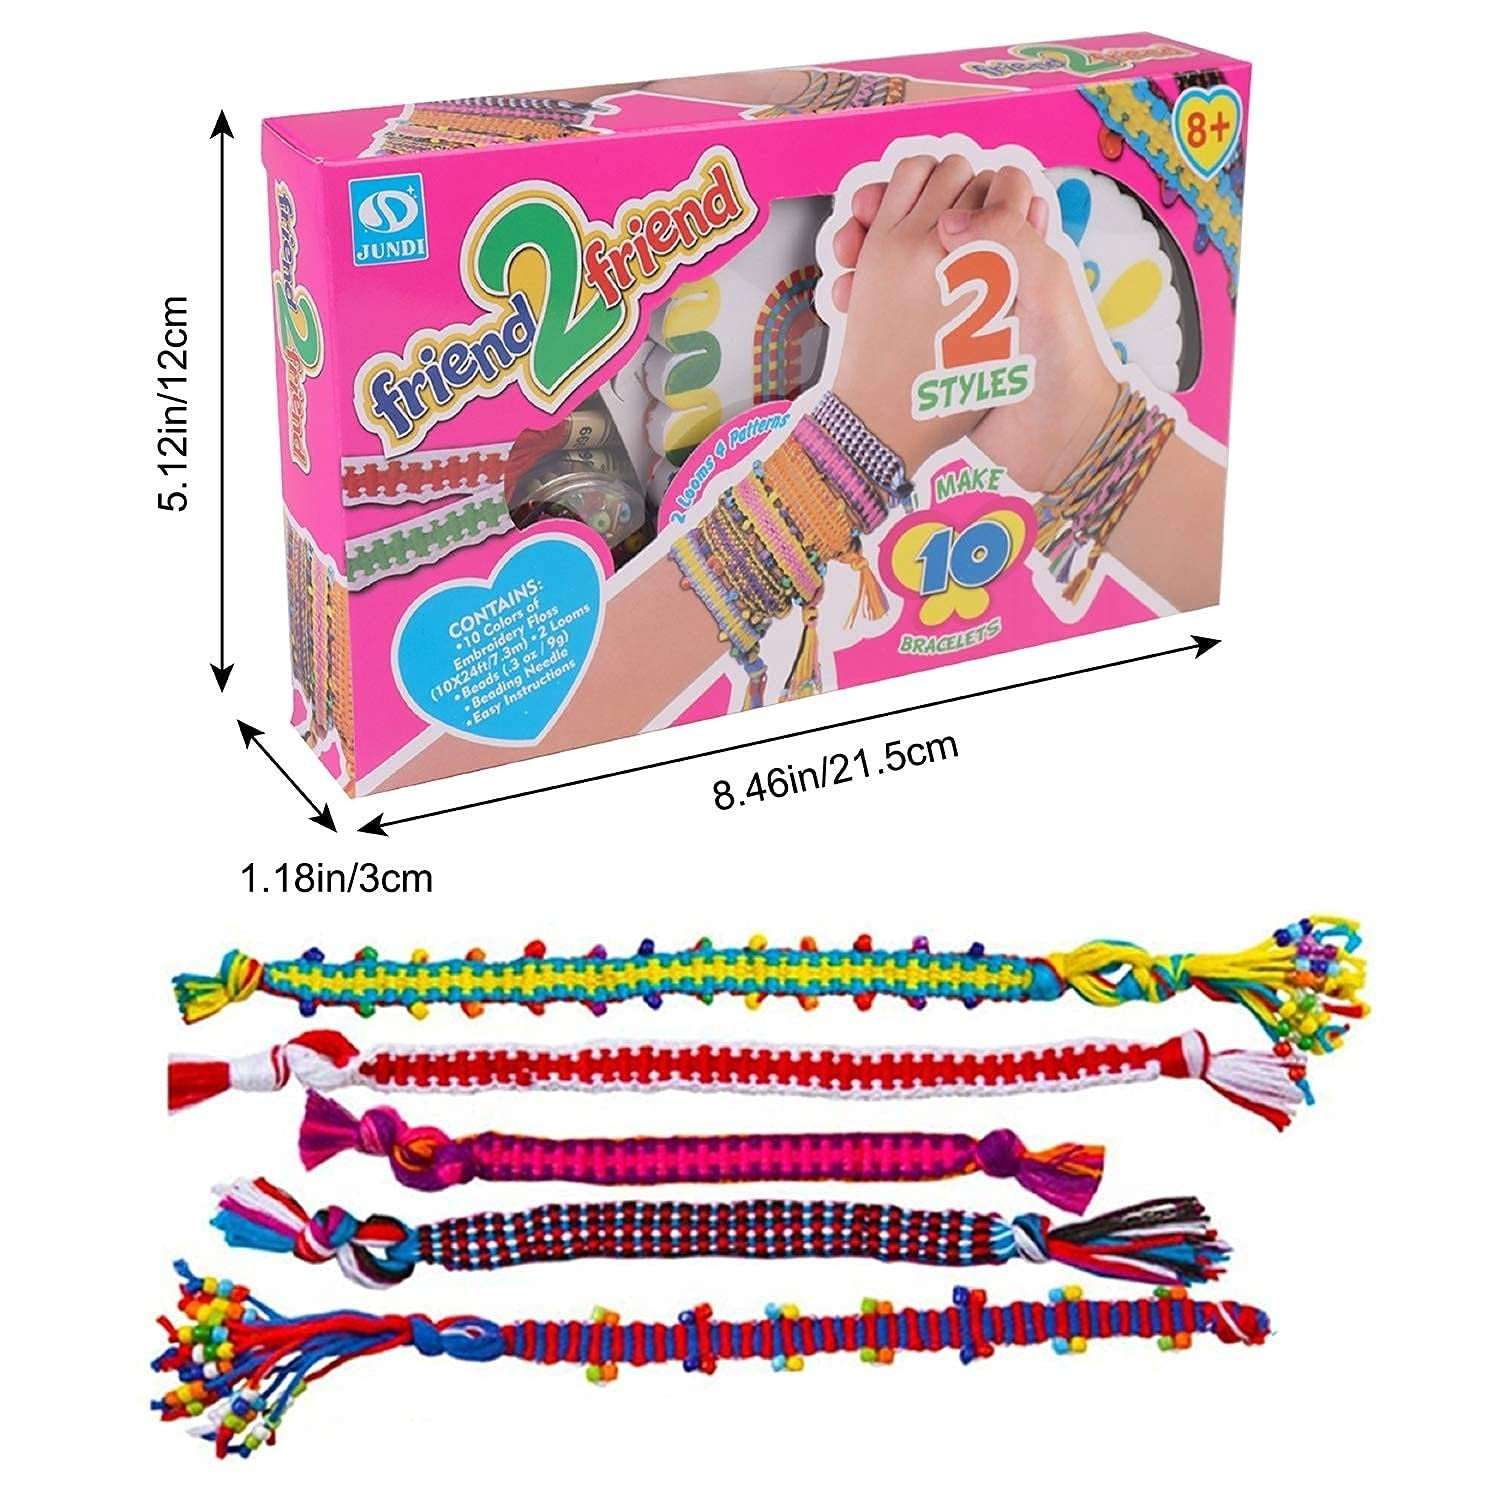 Kayannuo Clearance Friendship Bracelet Making Kit For 5-12 Year Old Girls,  Arts And Crafts For Kids - Christmas Or Birthday Gift - Walmart.com